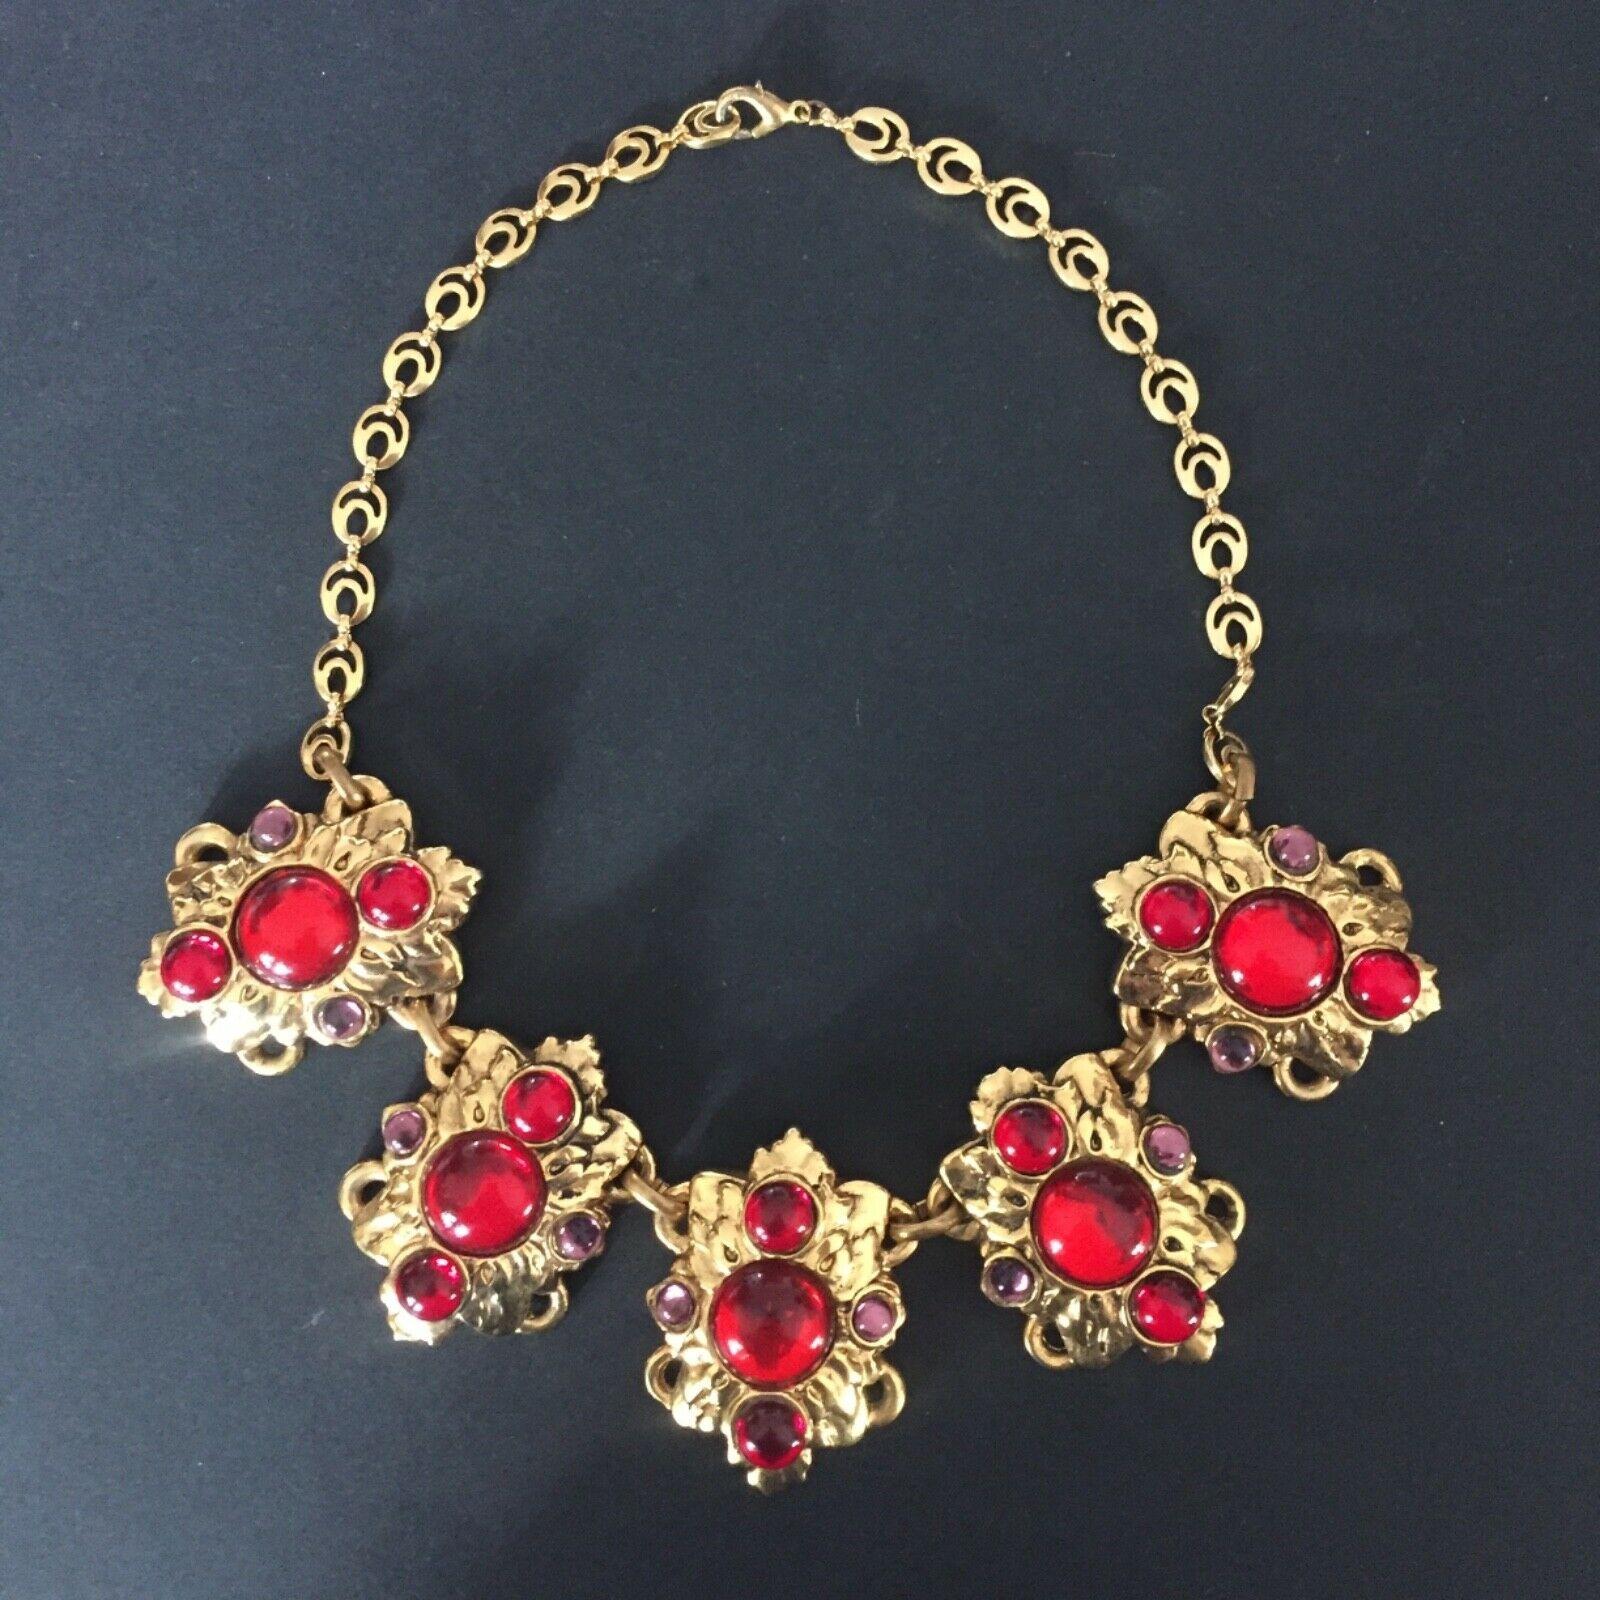 Extremely rare sublime NEO Baroque NECKLACE,
Vintage 1980s,
by essential designer DOMINIQUE DENAIVE,
high fashion,
in resin and glass cabochons,
total length 49 cm, length without chain 20 cm, height 5 cm, weight 135 g,
very good state.

(if you are